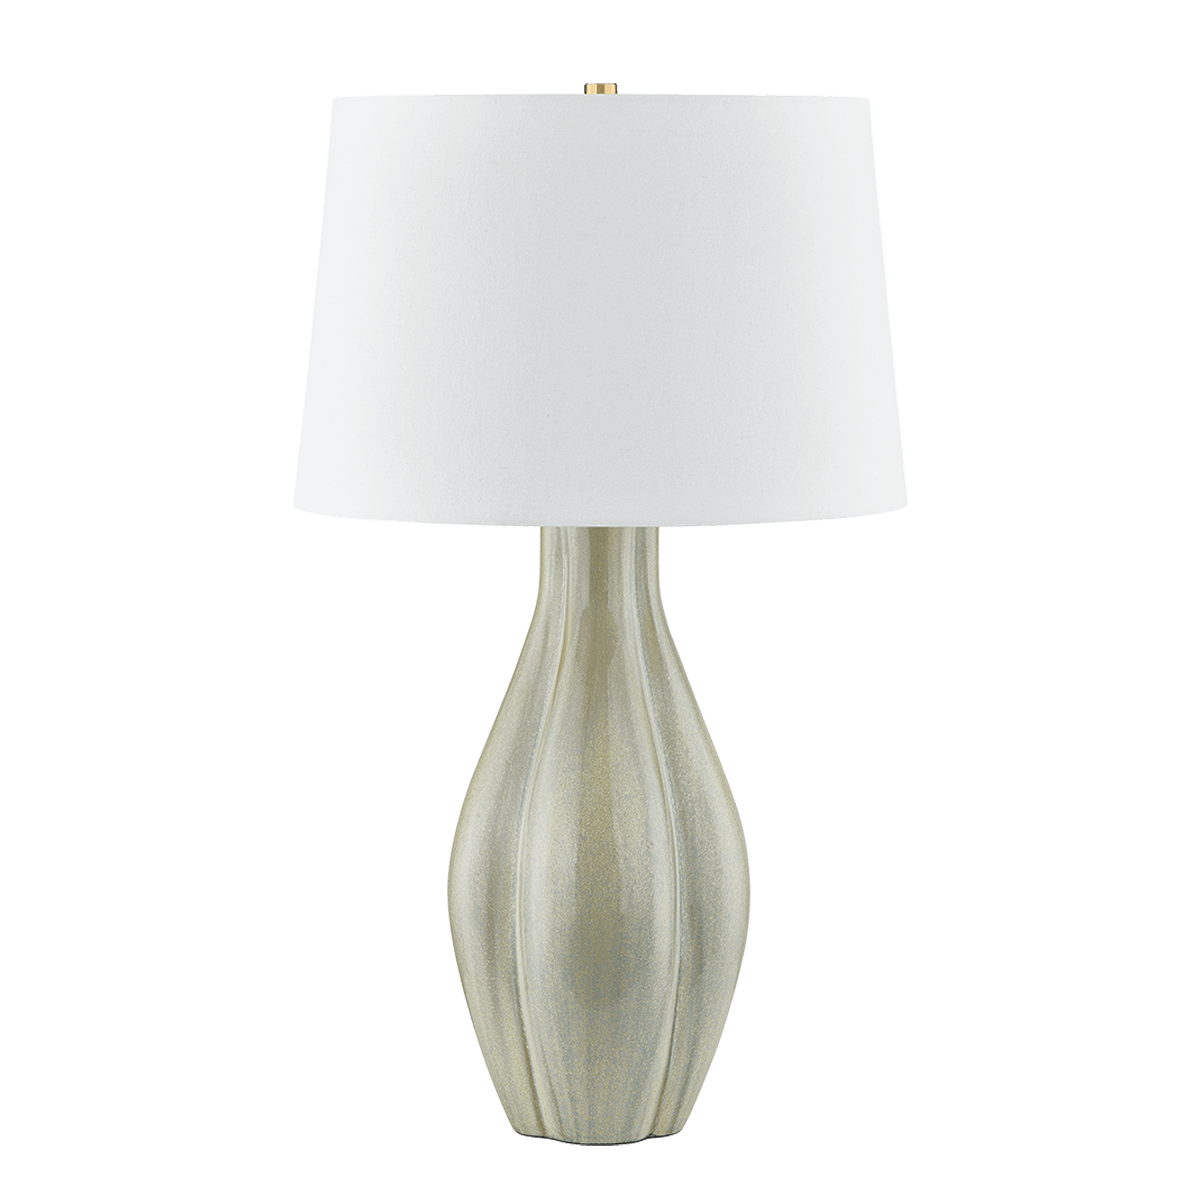 Hudson Valley Lighting - Galloway Table Lamp - L7231-AGB/C02 | Montreal Lighting & Hardware